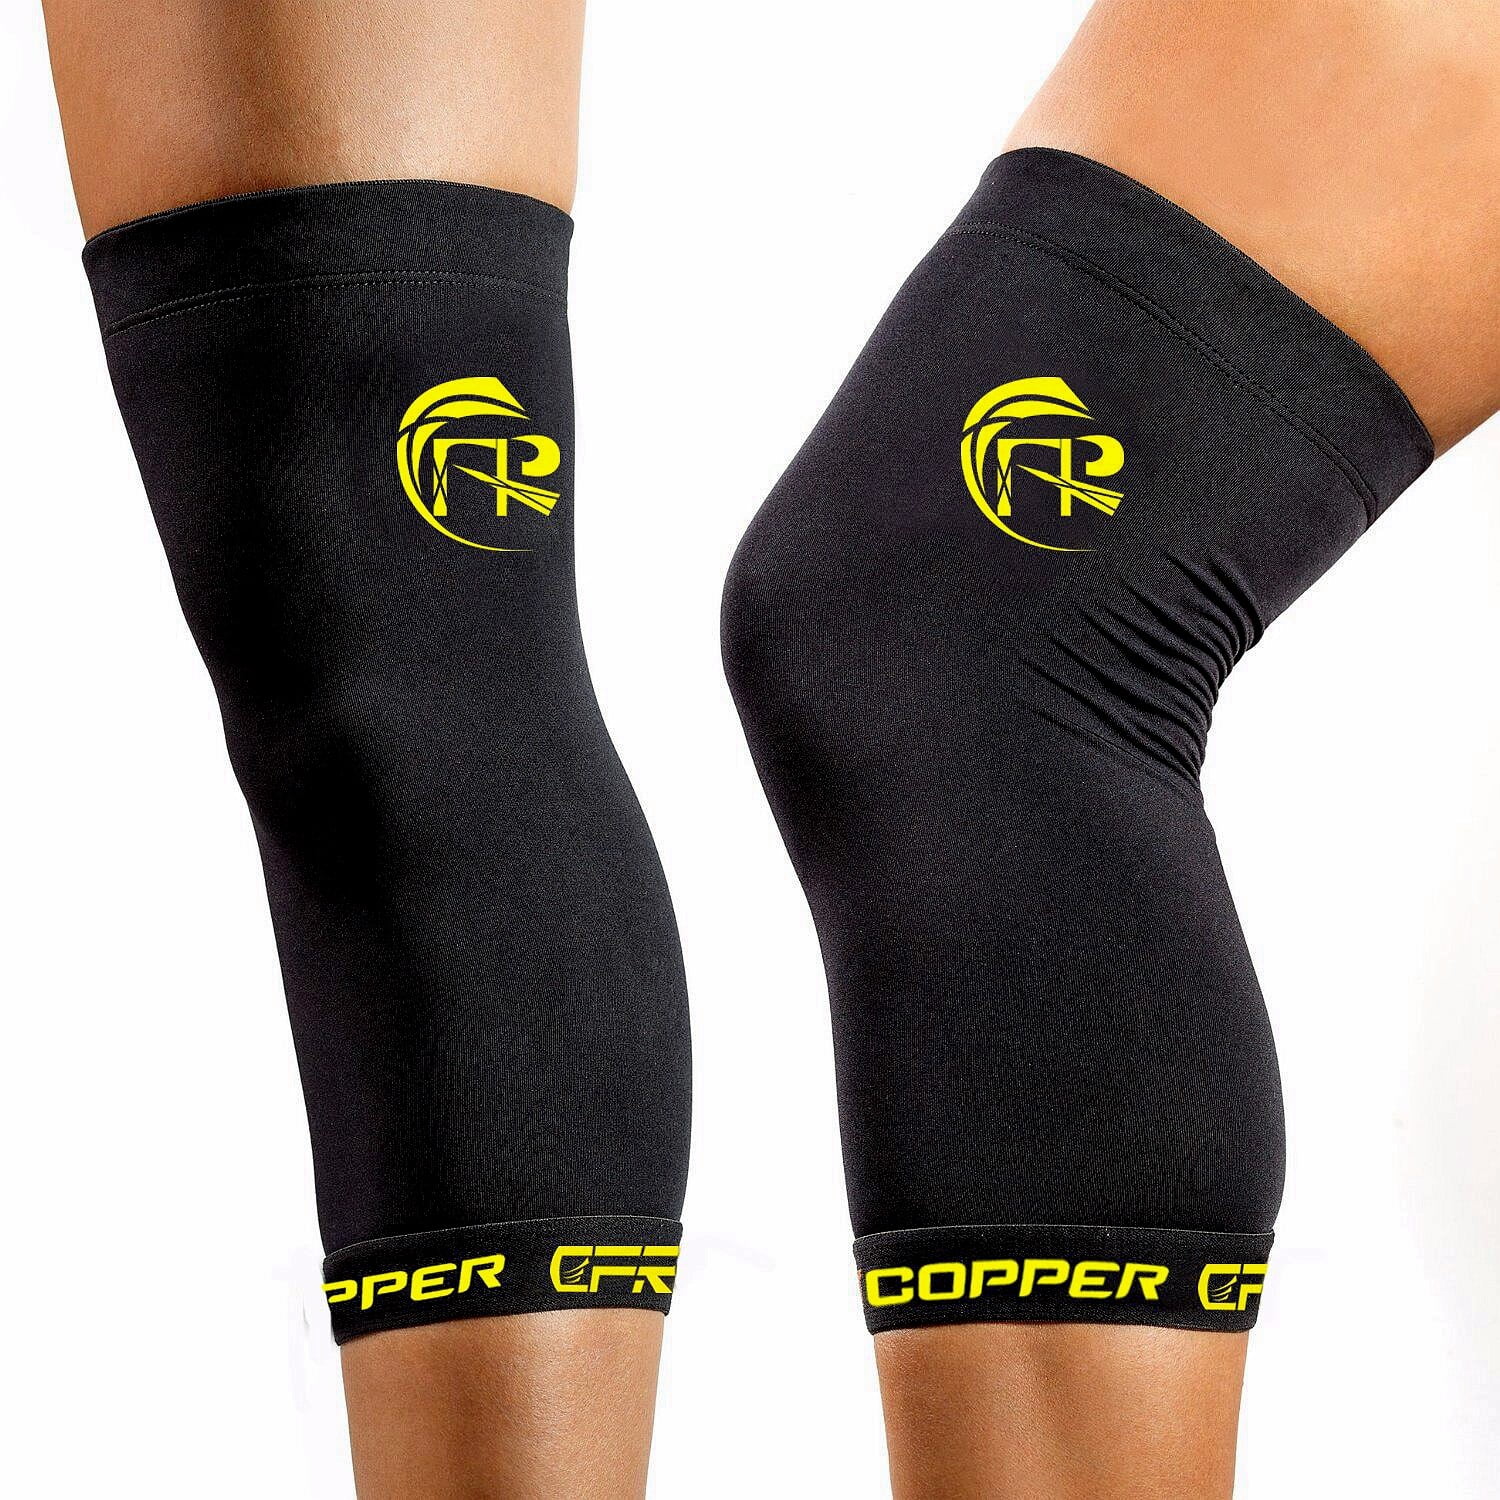 Mens Knee Brace Compression Sleeve Core Support Pain Relief by TOMMIE COPPER 2XL 